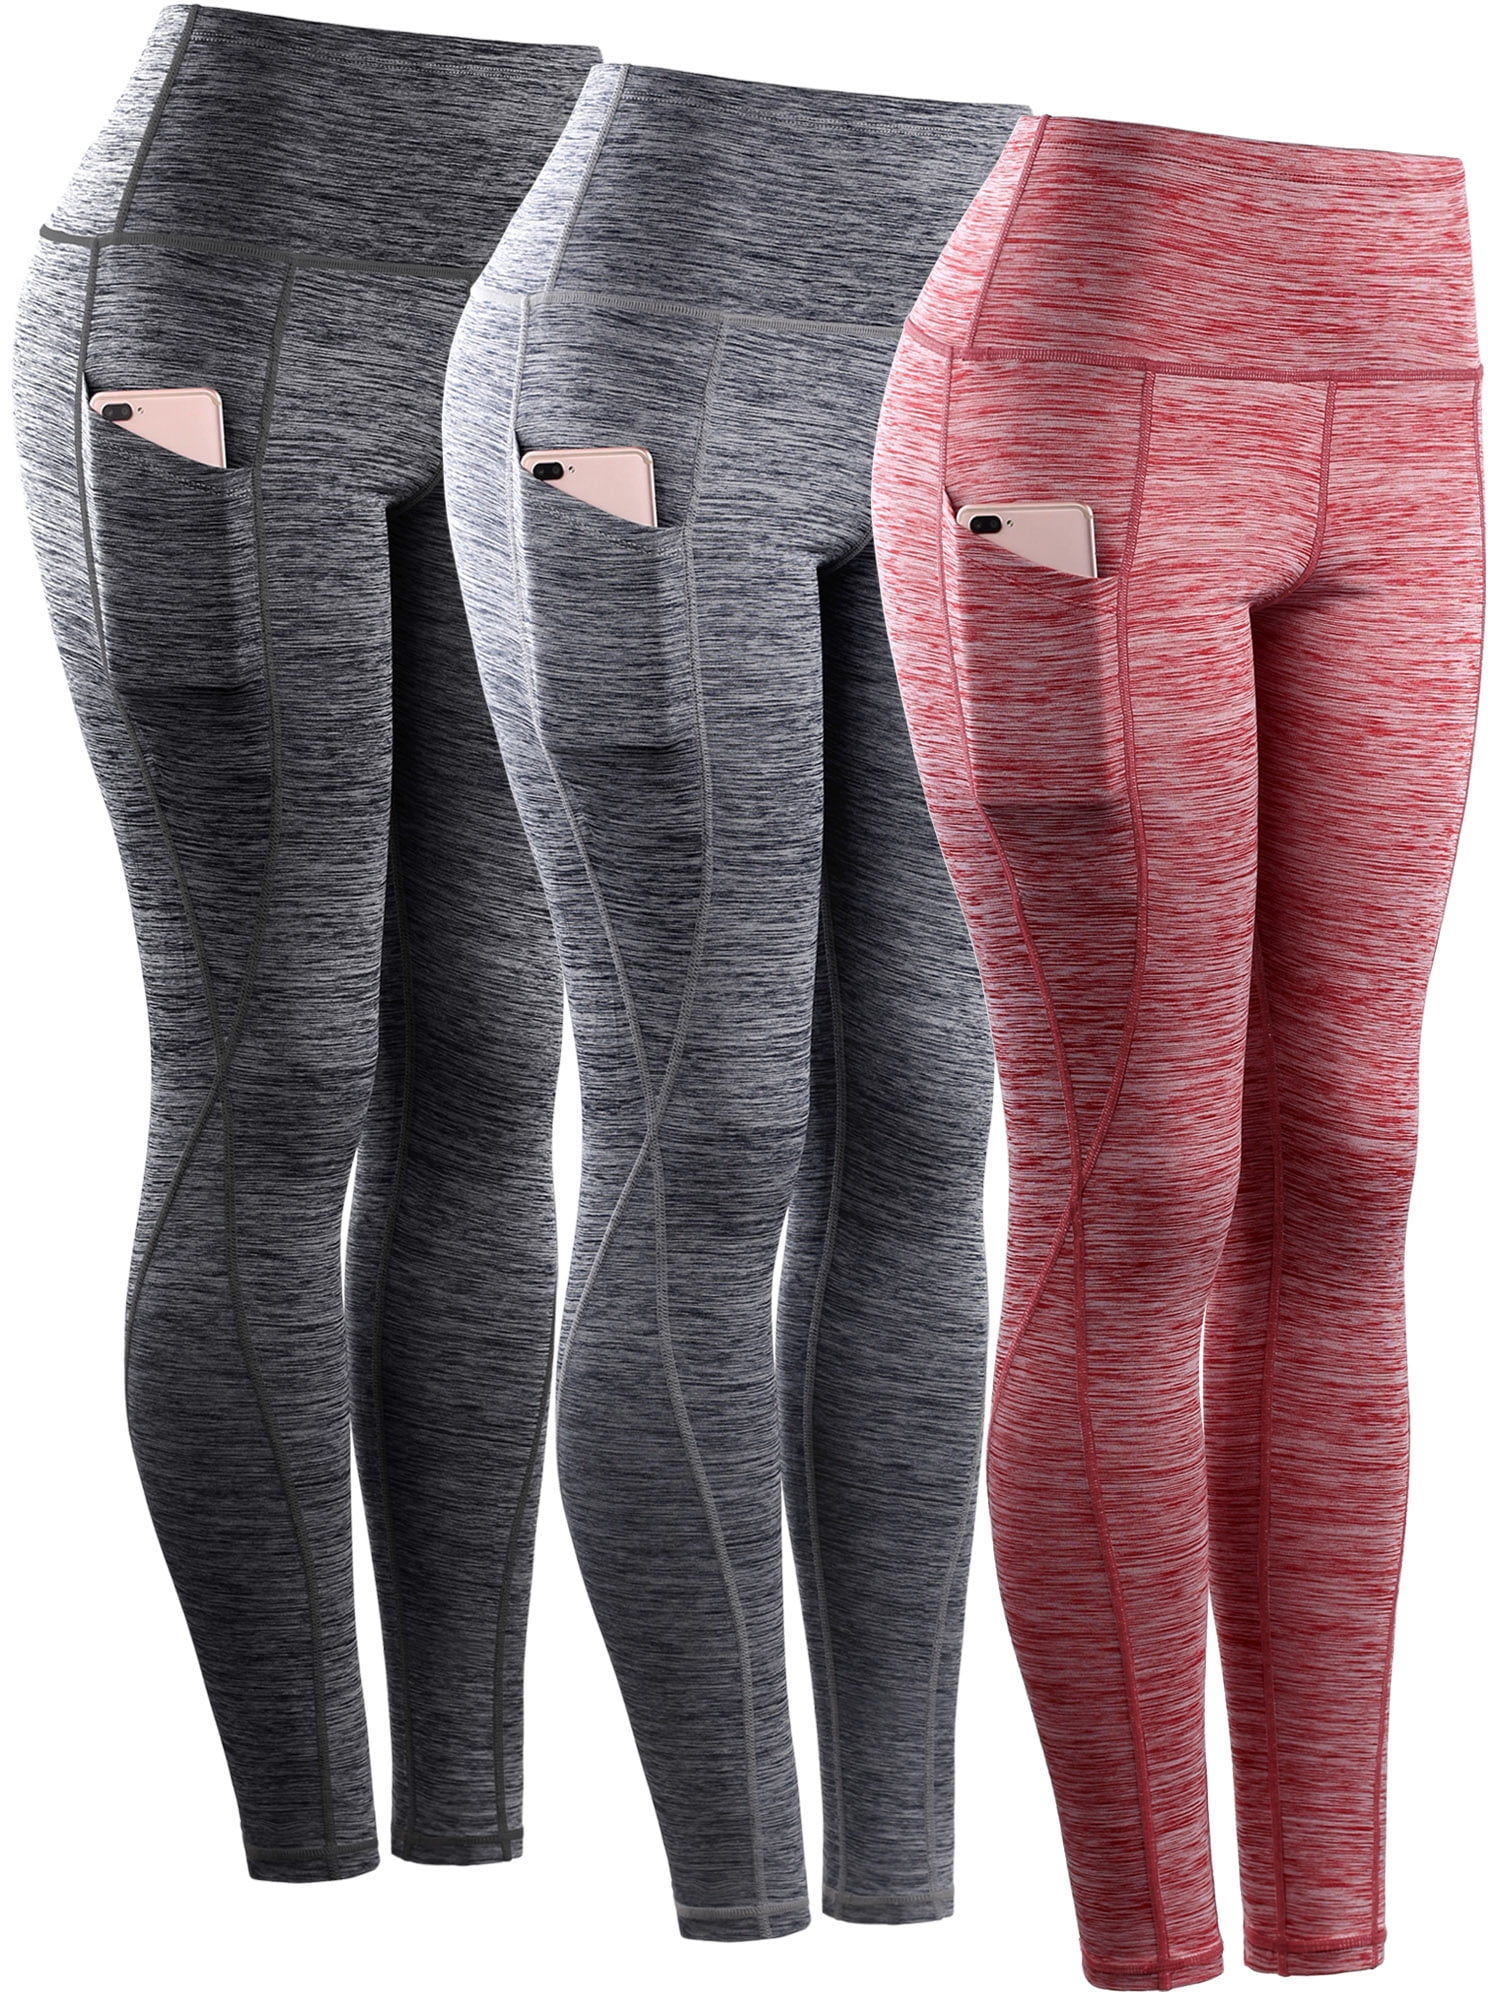 Route 15 High Waisted Workout Leggings for Women. 4 Way Stretch Tummy  Control with Mobile Pockets for Gym Running and Yoga.PRICE$14.99 E  TESTING PRODUCTS FOR USA PM ME TO GET DETAILS. 